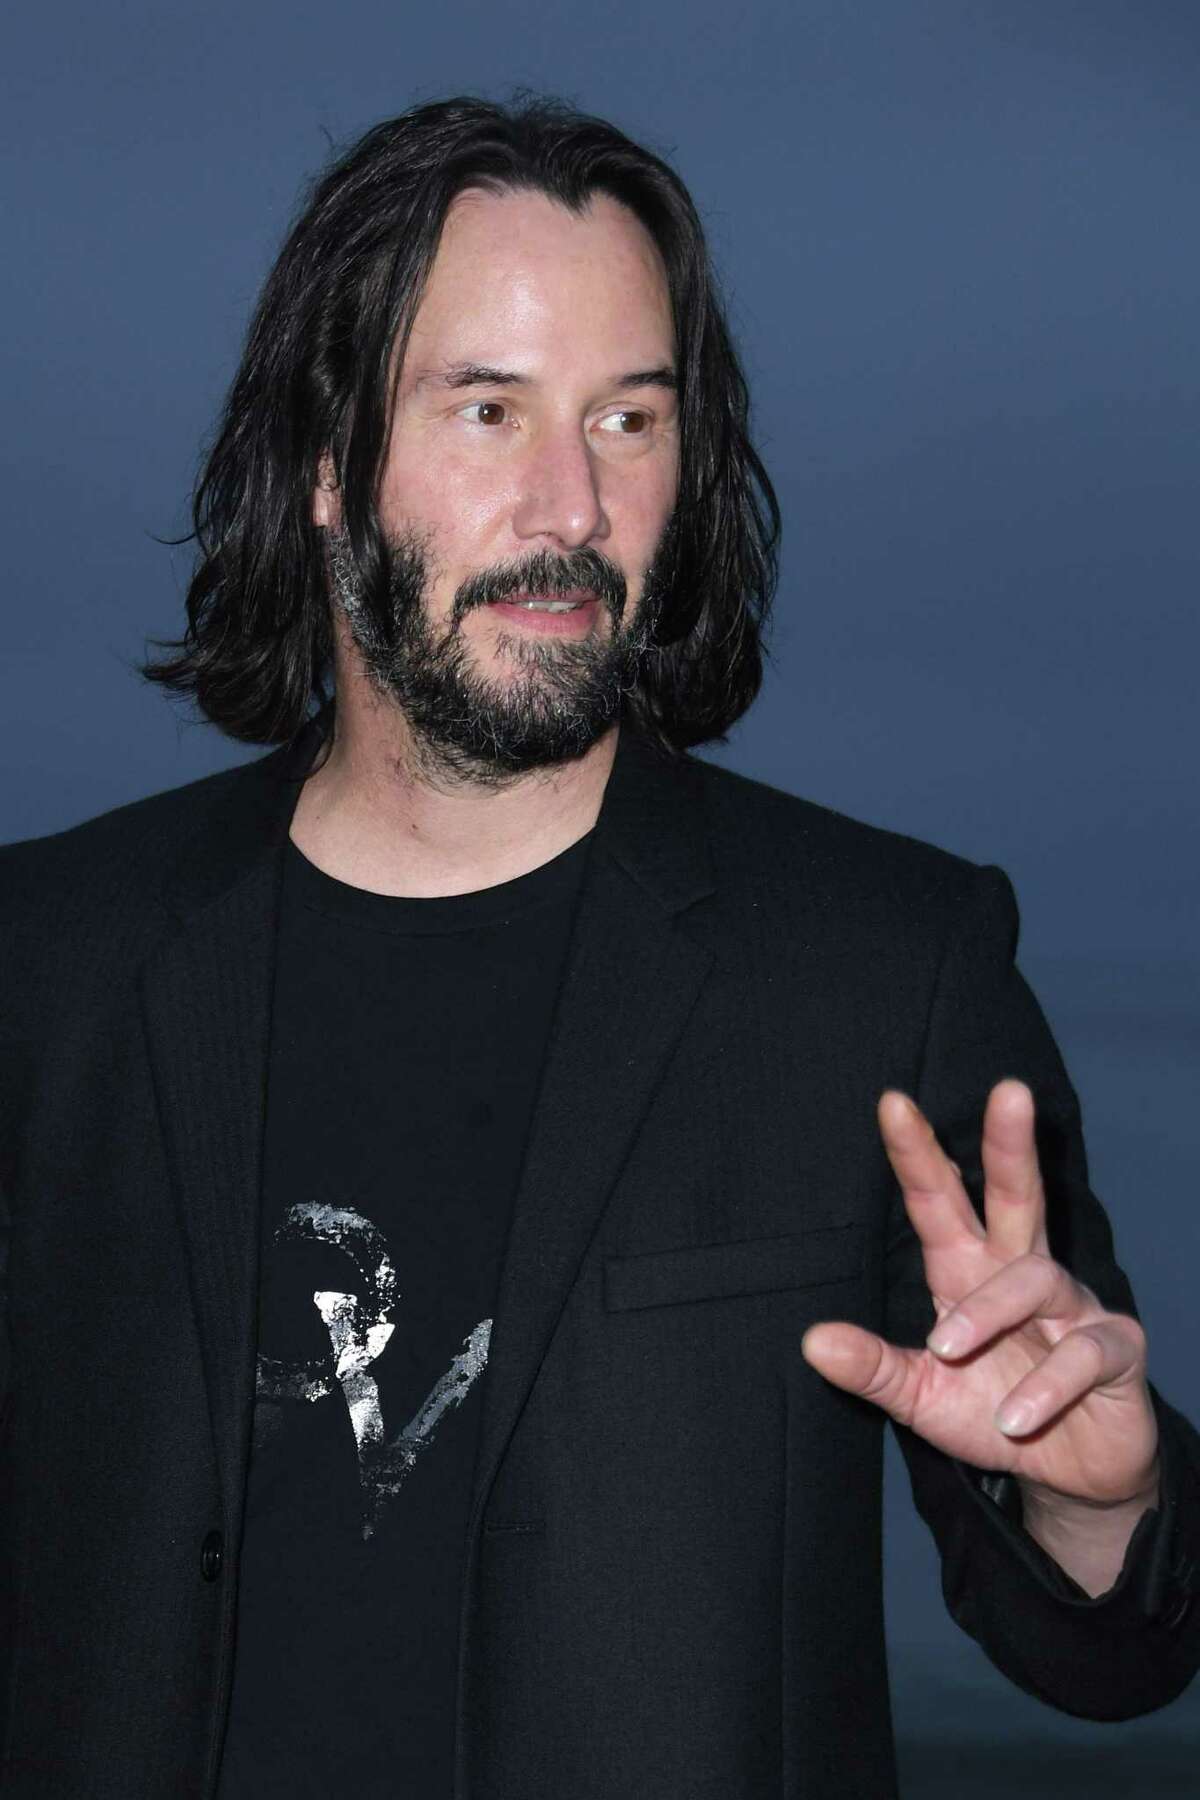 Canadian-US actor Keanu Reeves arrives for the Saint Laurent Men's Spring-Summer 2020 runway show in Malibu, California, on June 6, 2019. (Photo by Valerie MACON / AFP)VALERIE MACON/AFP/Getty Images